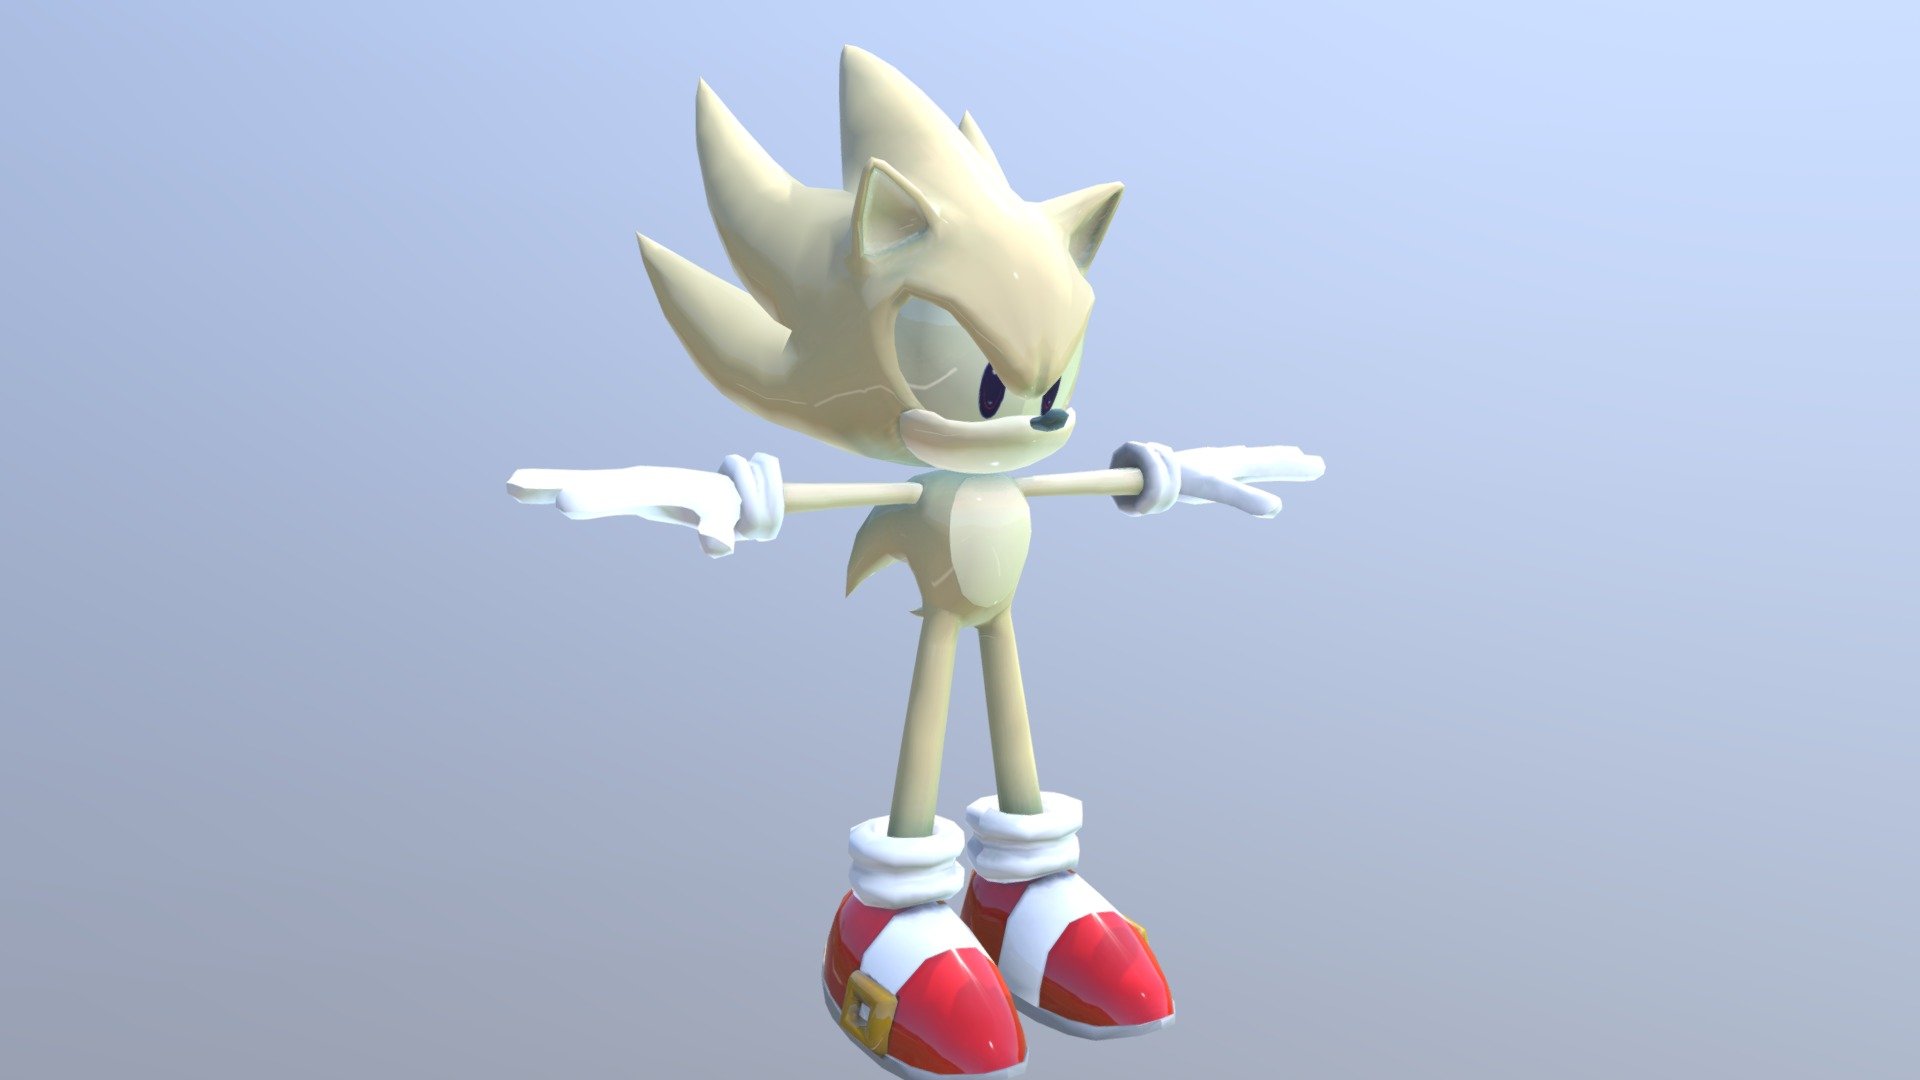 What if Hyper Sonic was in Sonic Adventure 